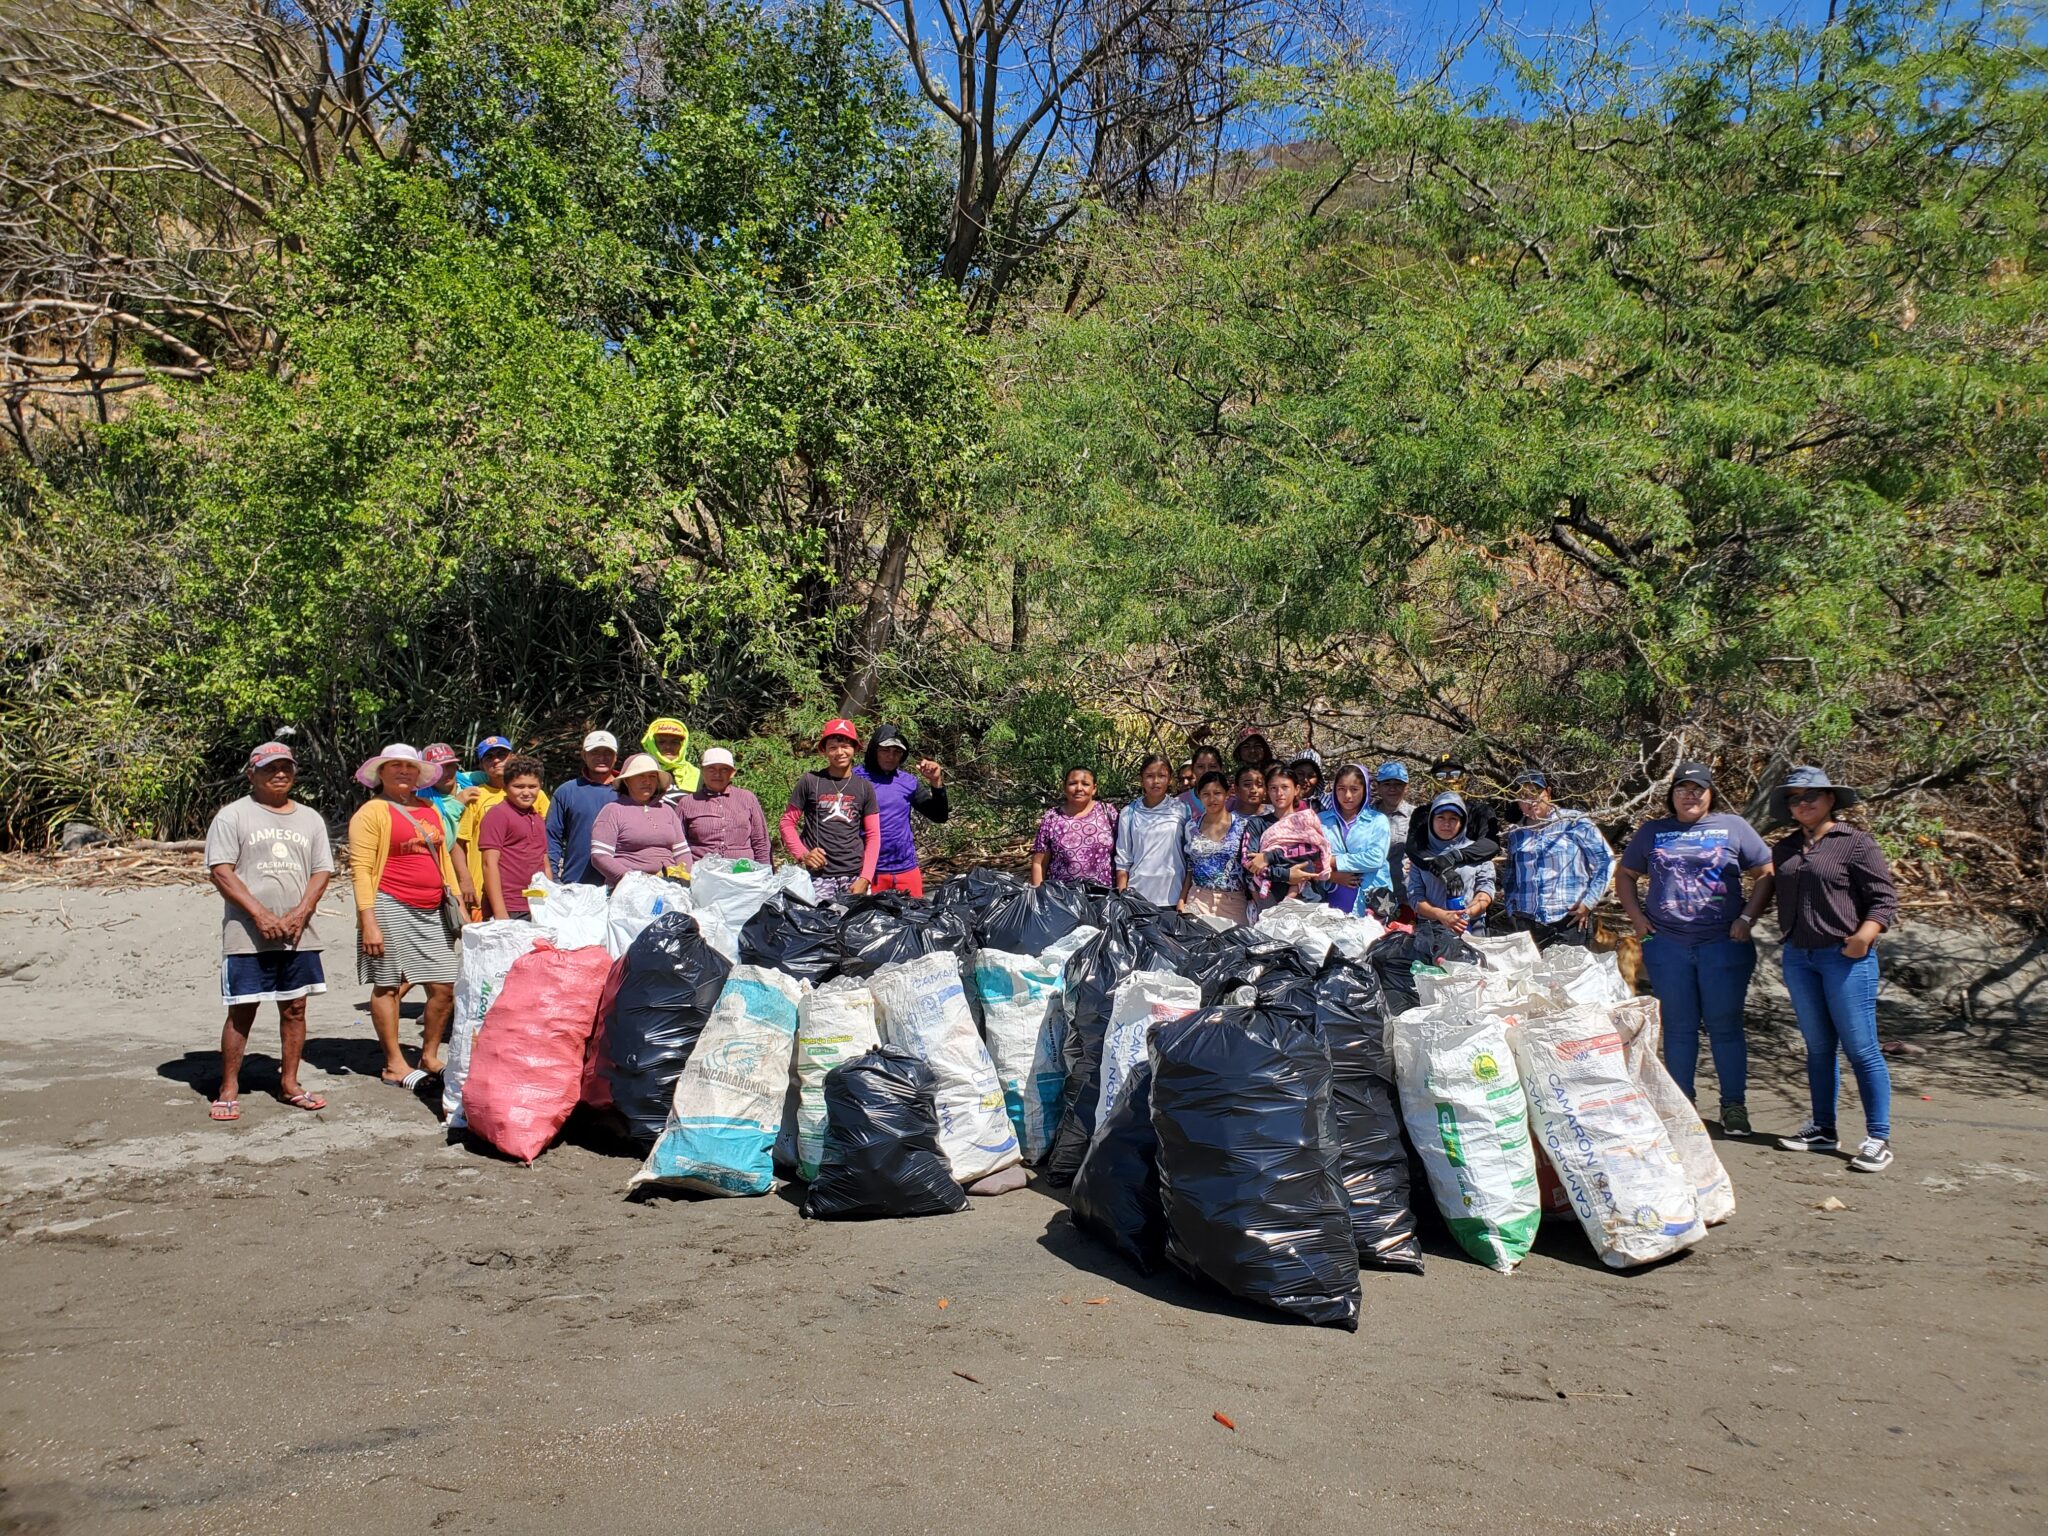 A group of people stand on a beach with many large trash bags